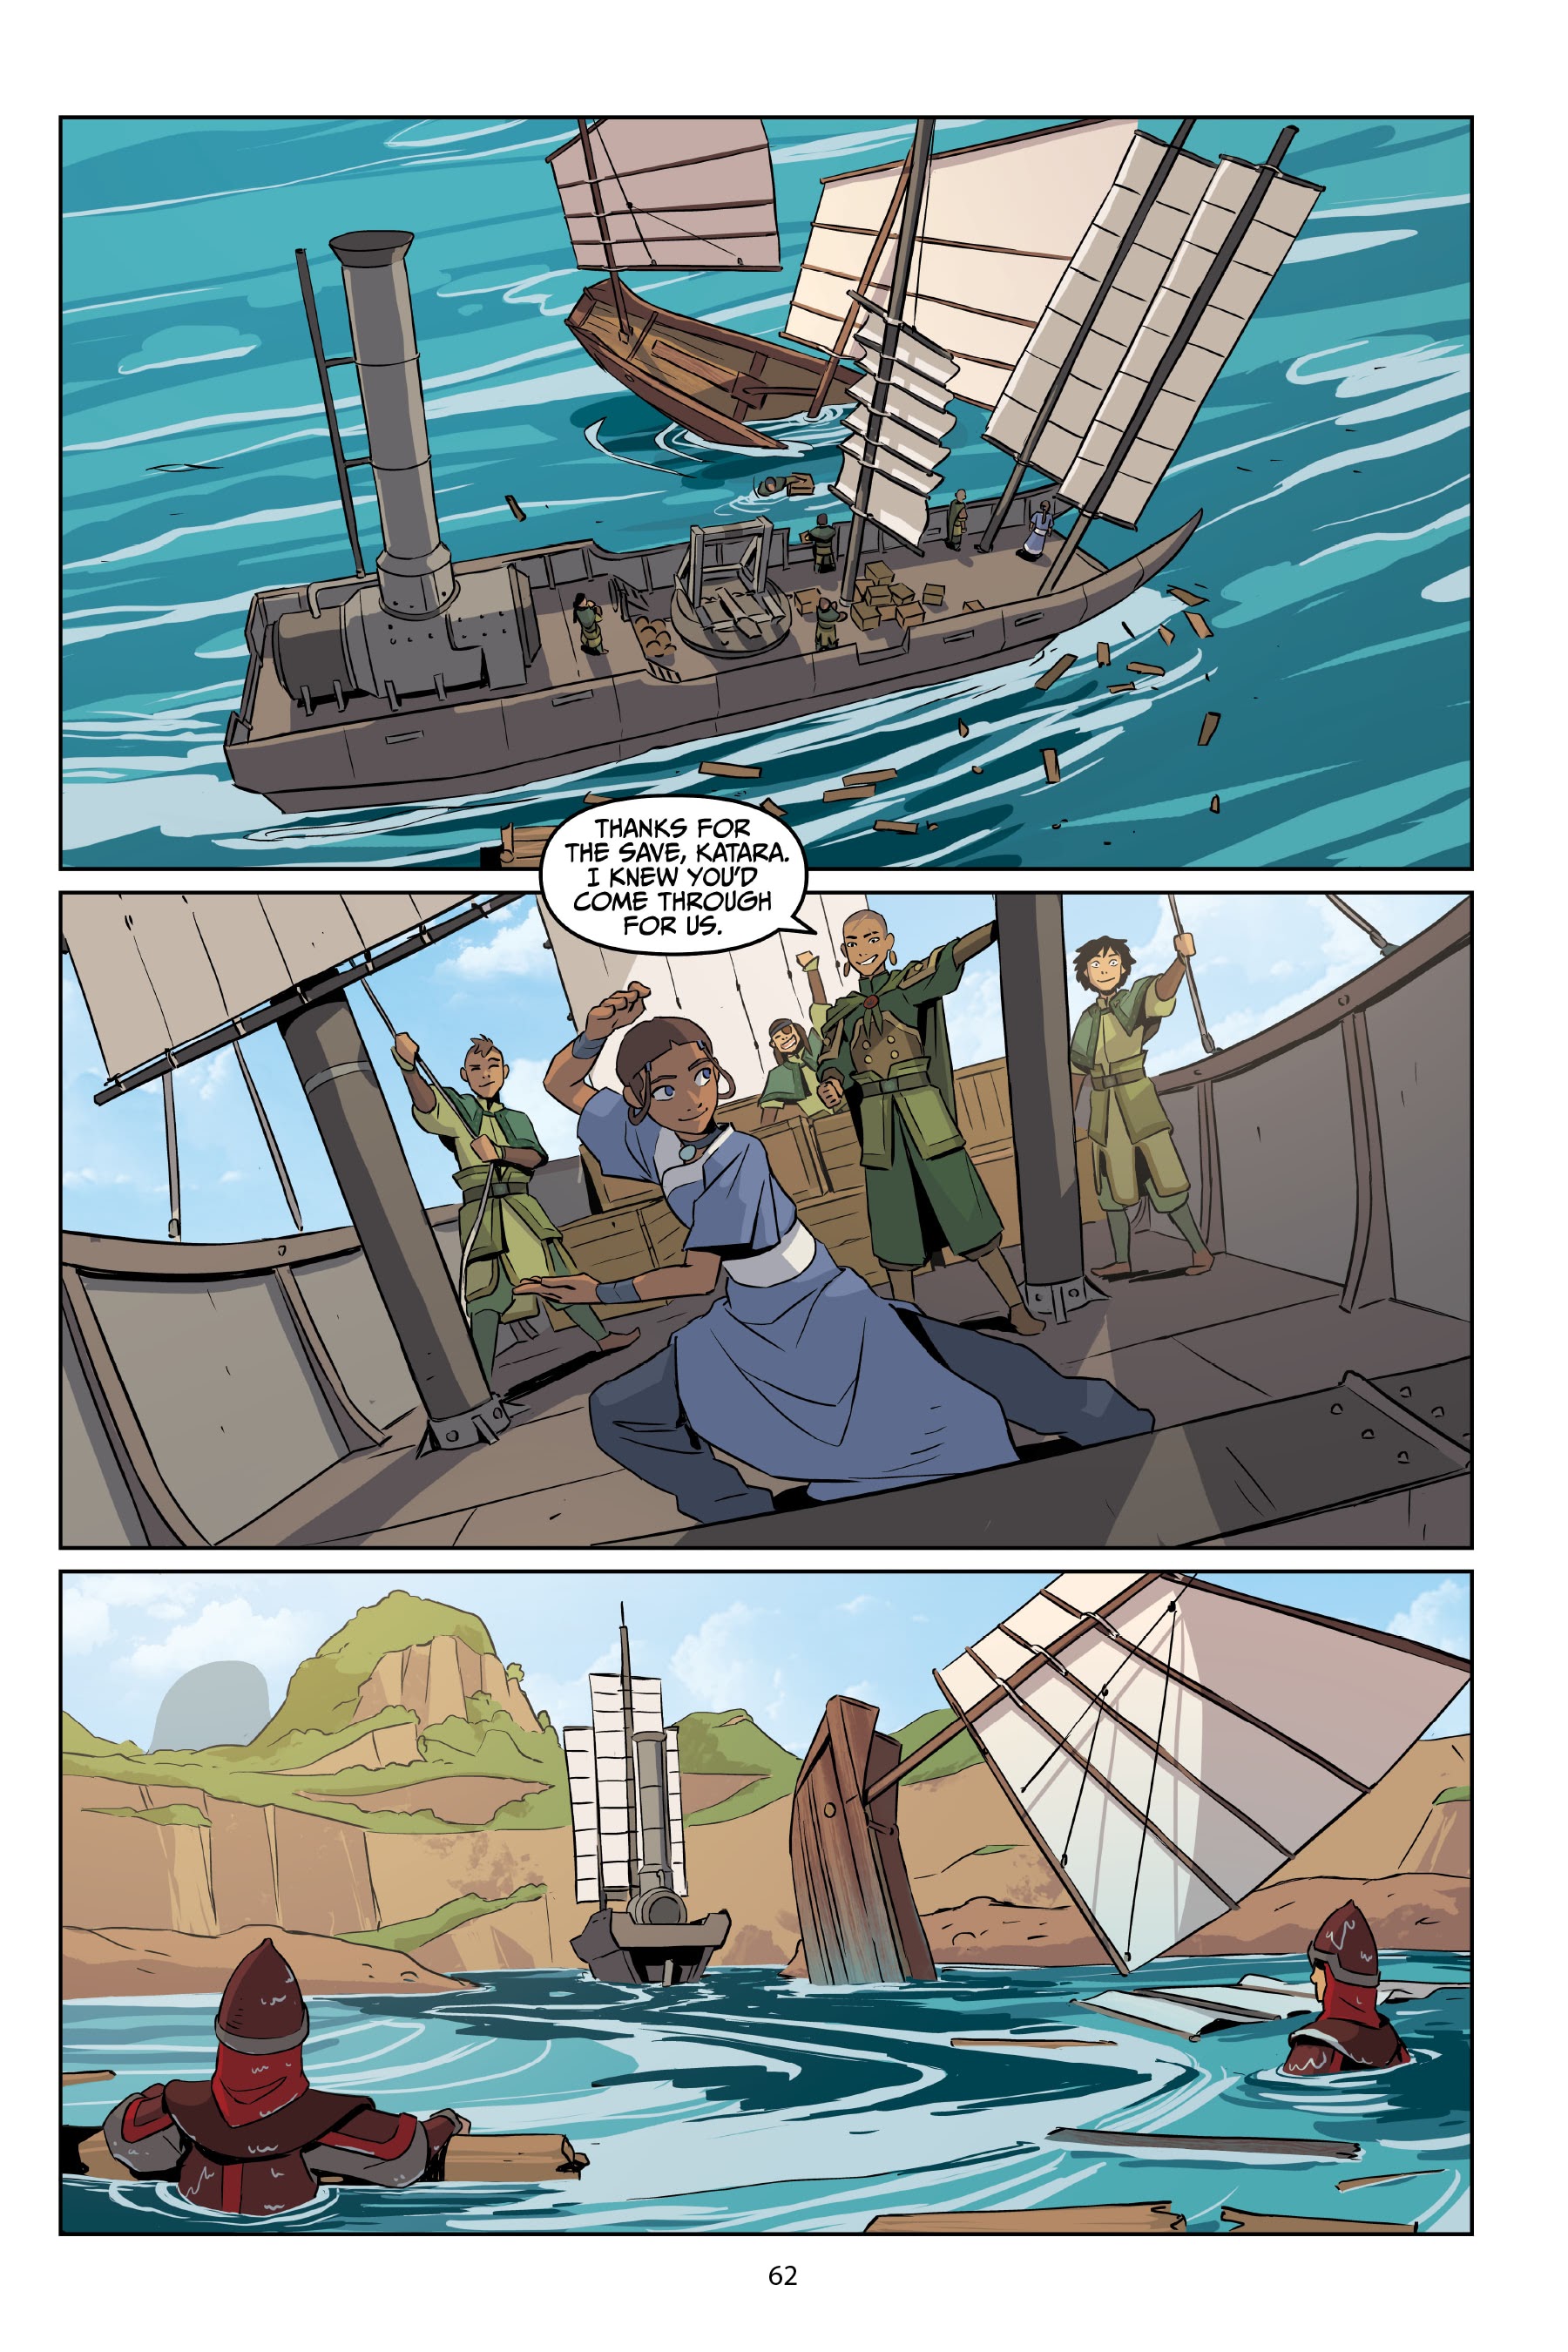 Read online Avatar: The Last Airbender—Katara and the Pirate's Silver comic -  Issue # TPB - 62